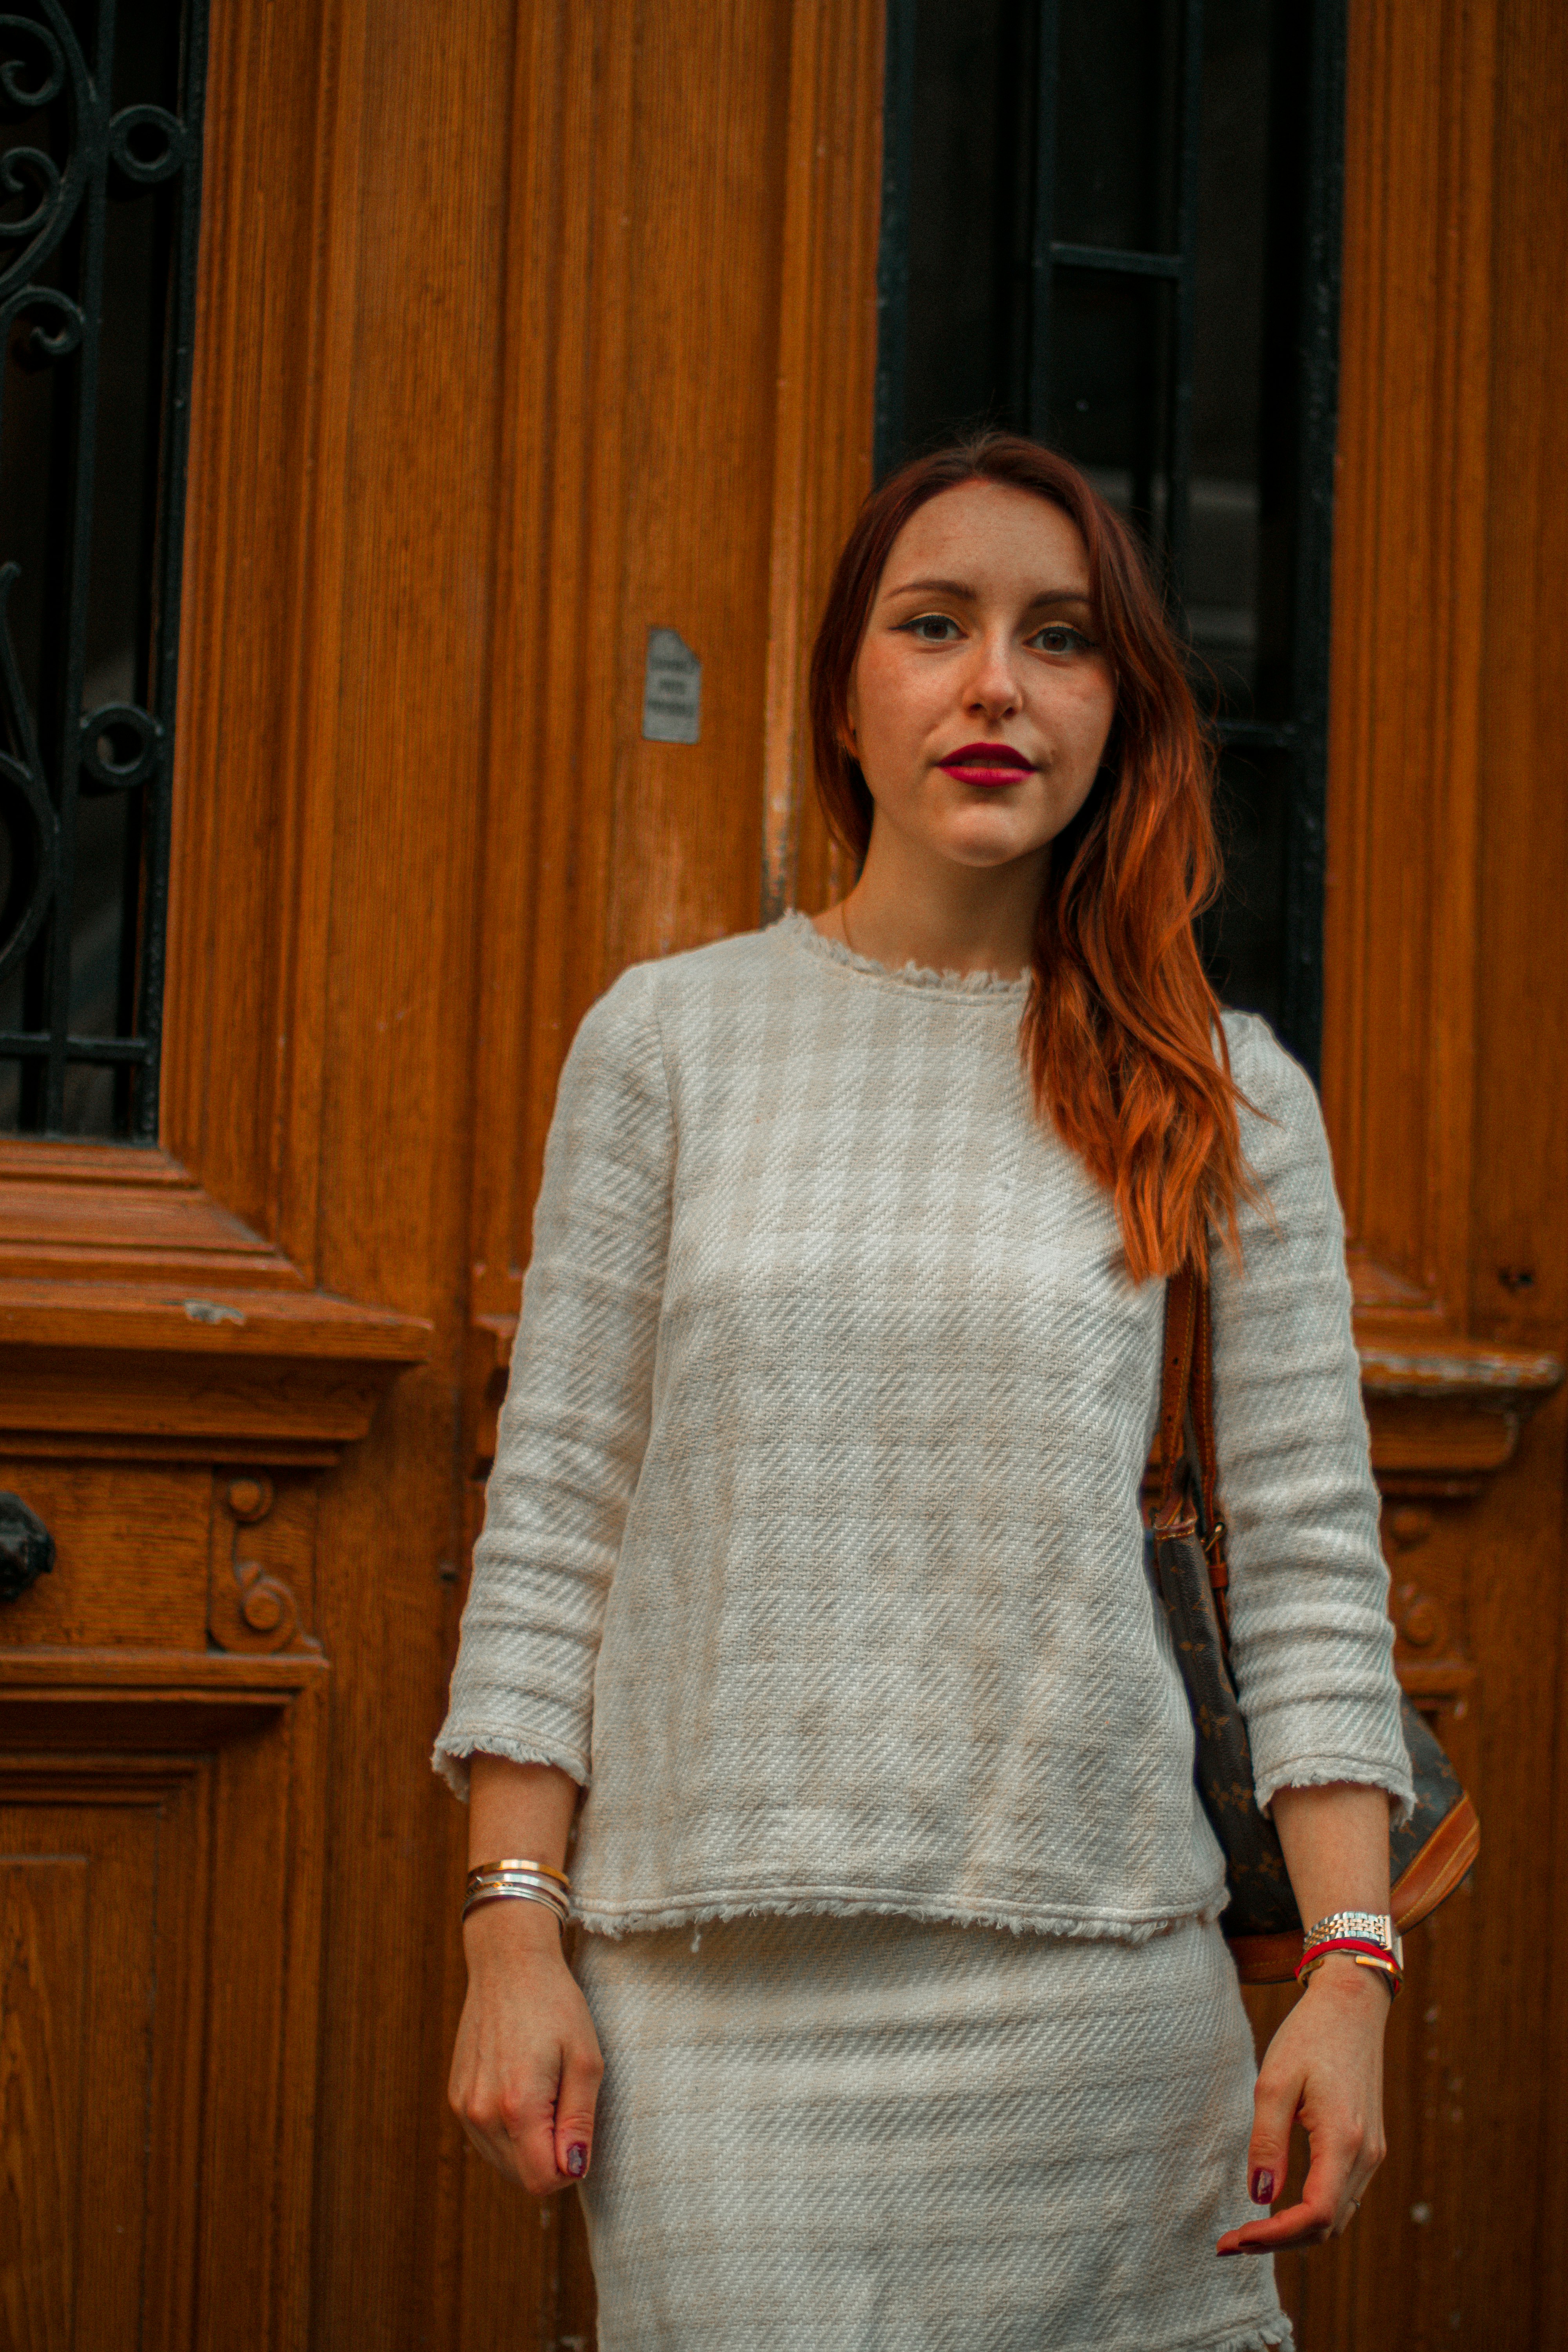 woman in white knit sweater standing near brown wooden door